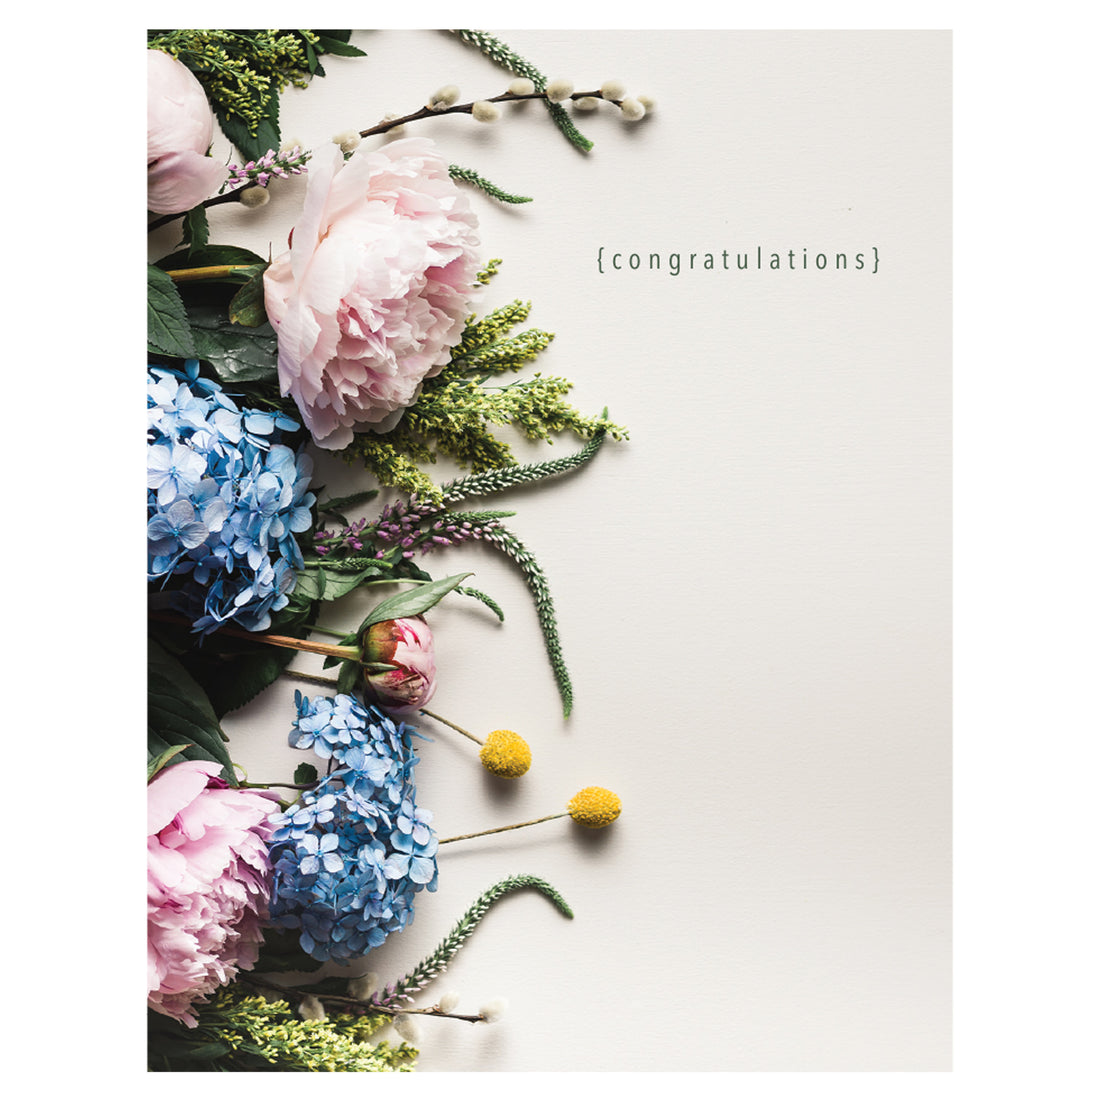 A photo of various flowers and botanicals in blue, pink, green and yellow entering the frame from the left side of the off-white background with &quot;{congratulations}&quot; printed in the top right.